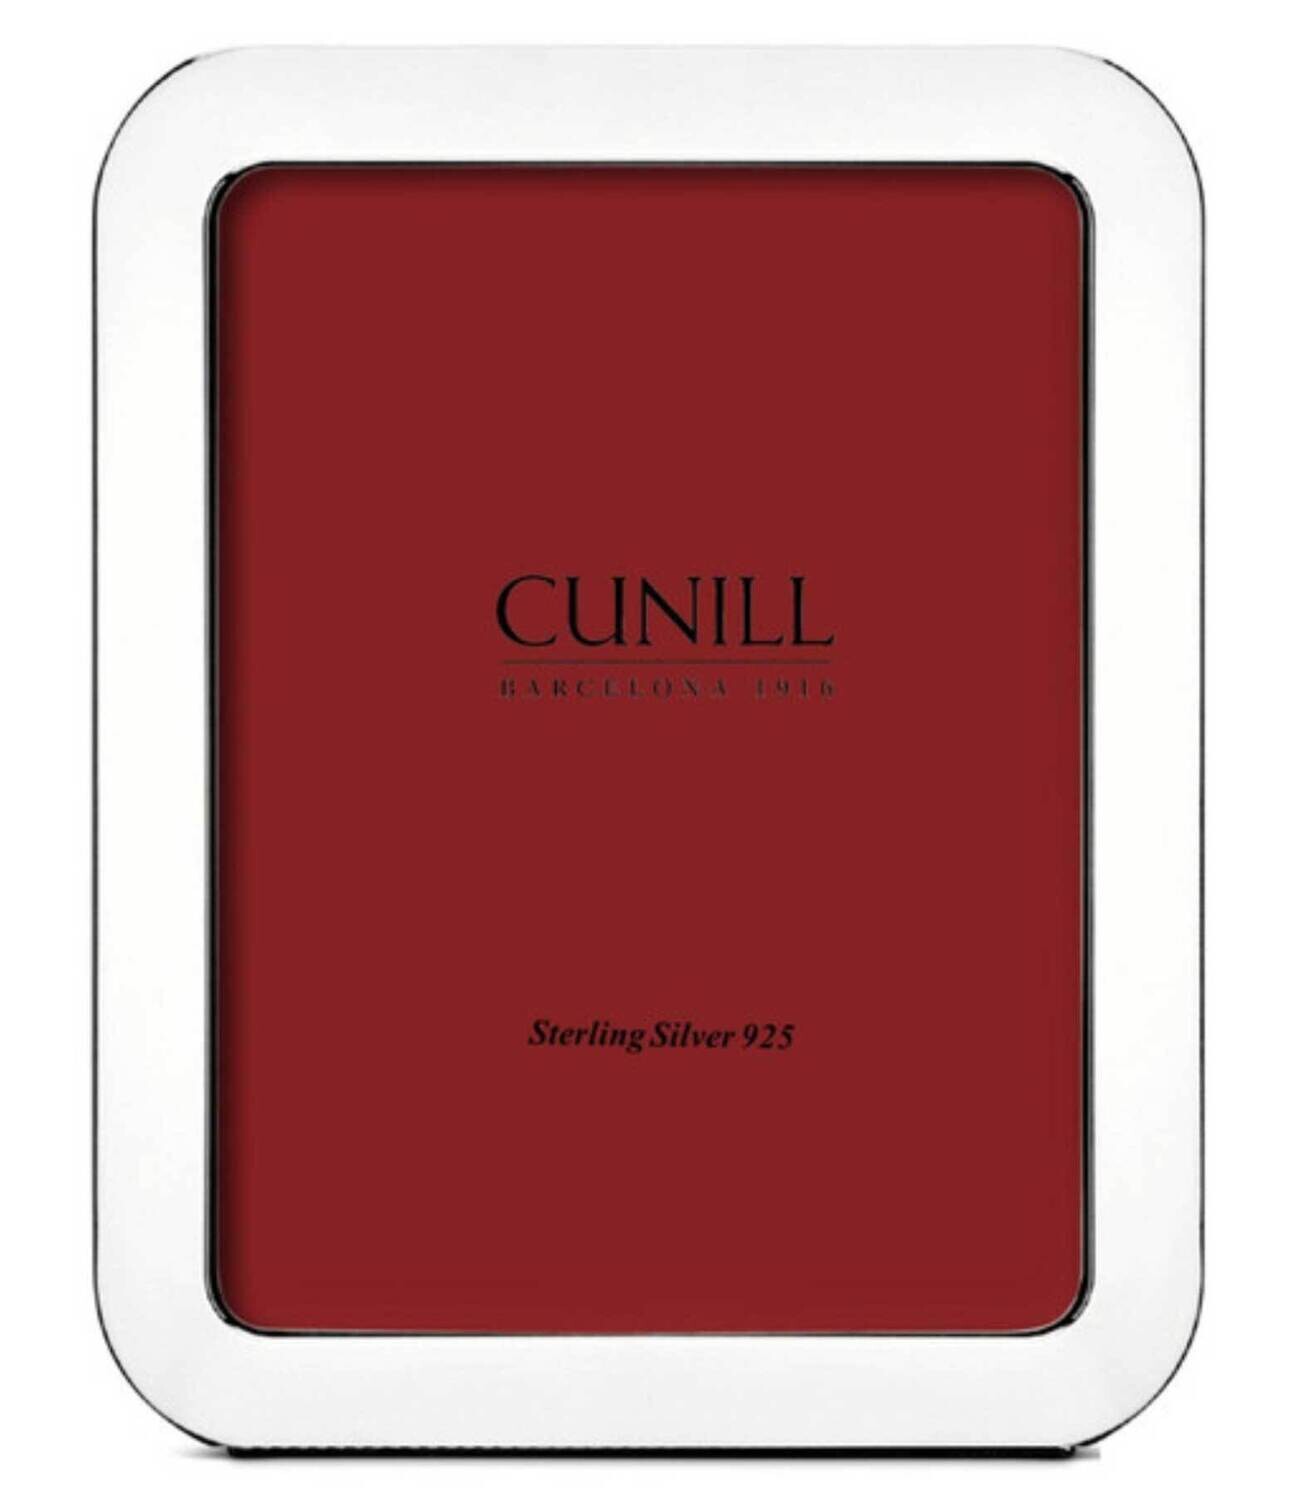 Cunill Manchester 8x10 Inch Picture Frame .925 Sterling Silver 189679